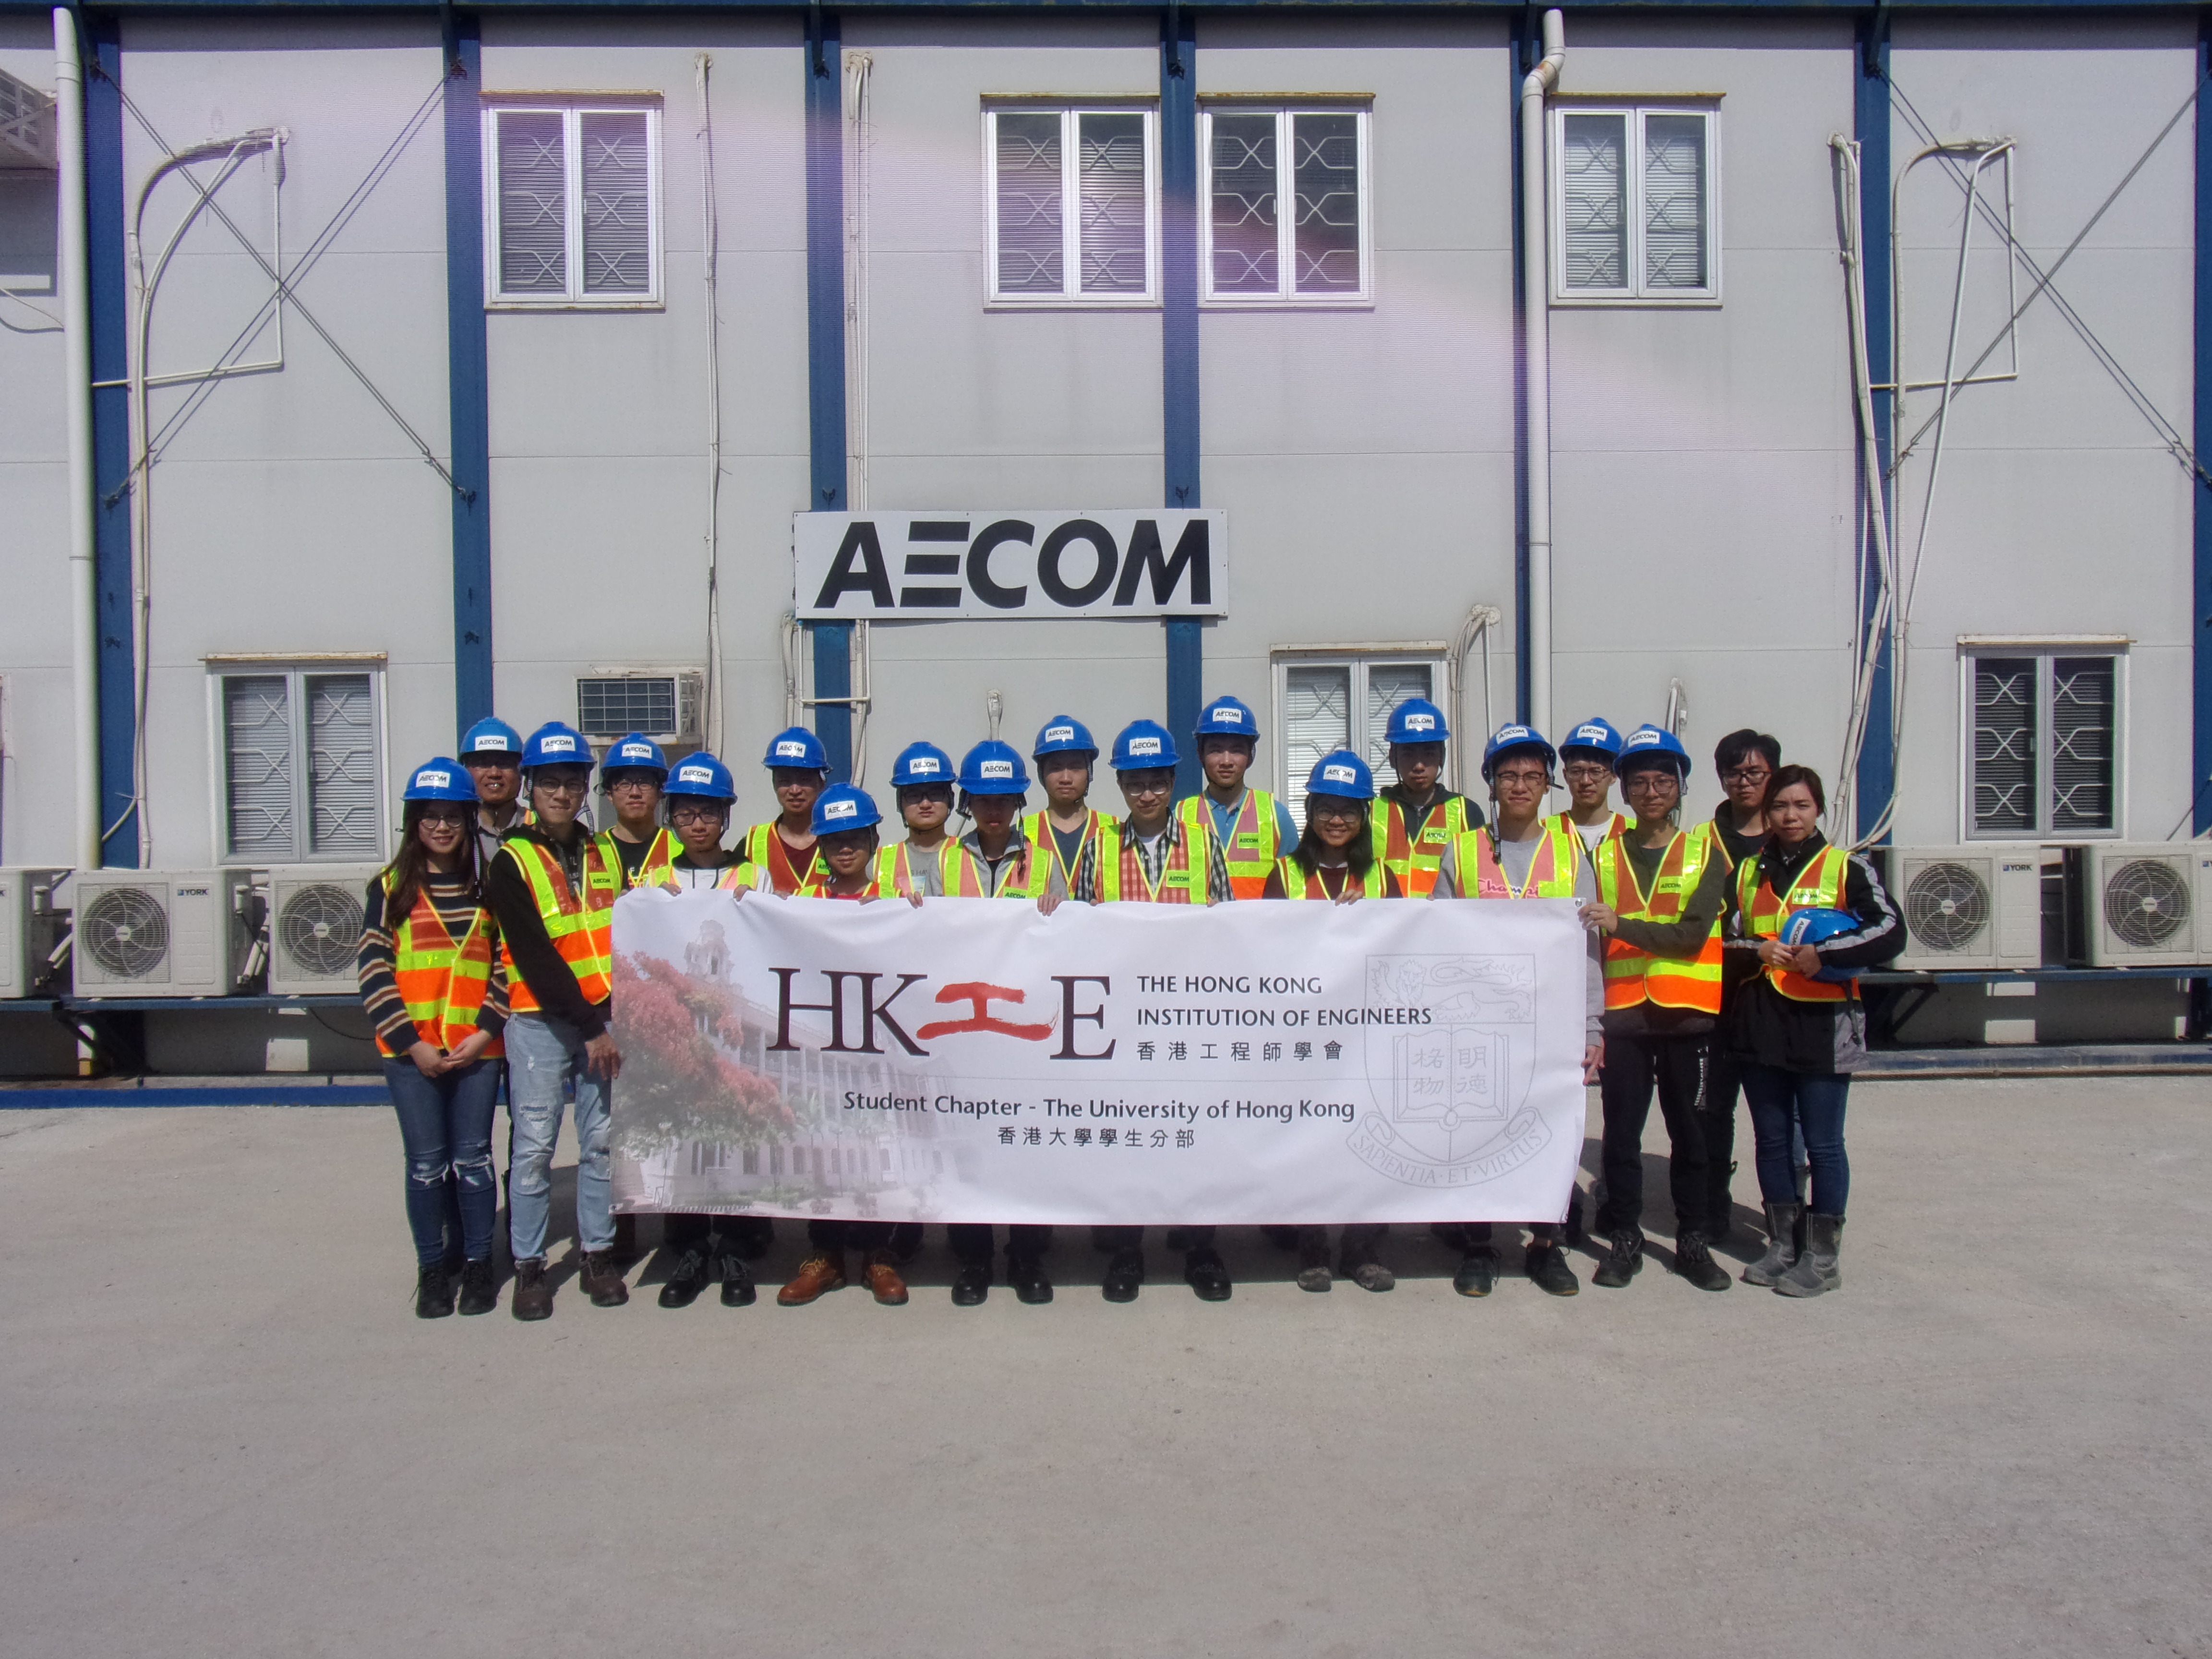 Site visit - The Hong Kong Institution of Engineers